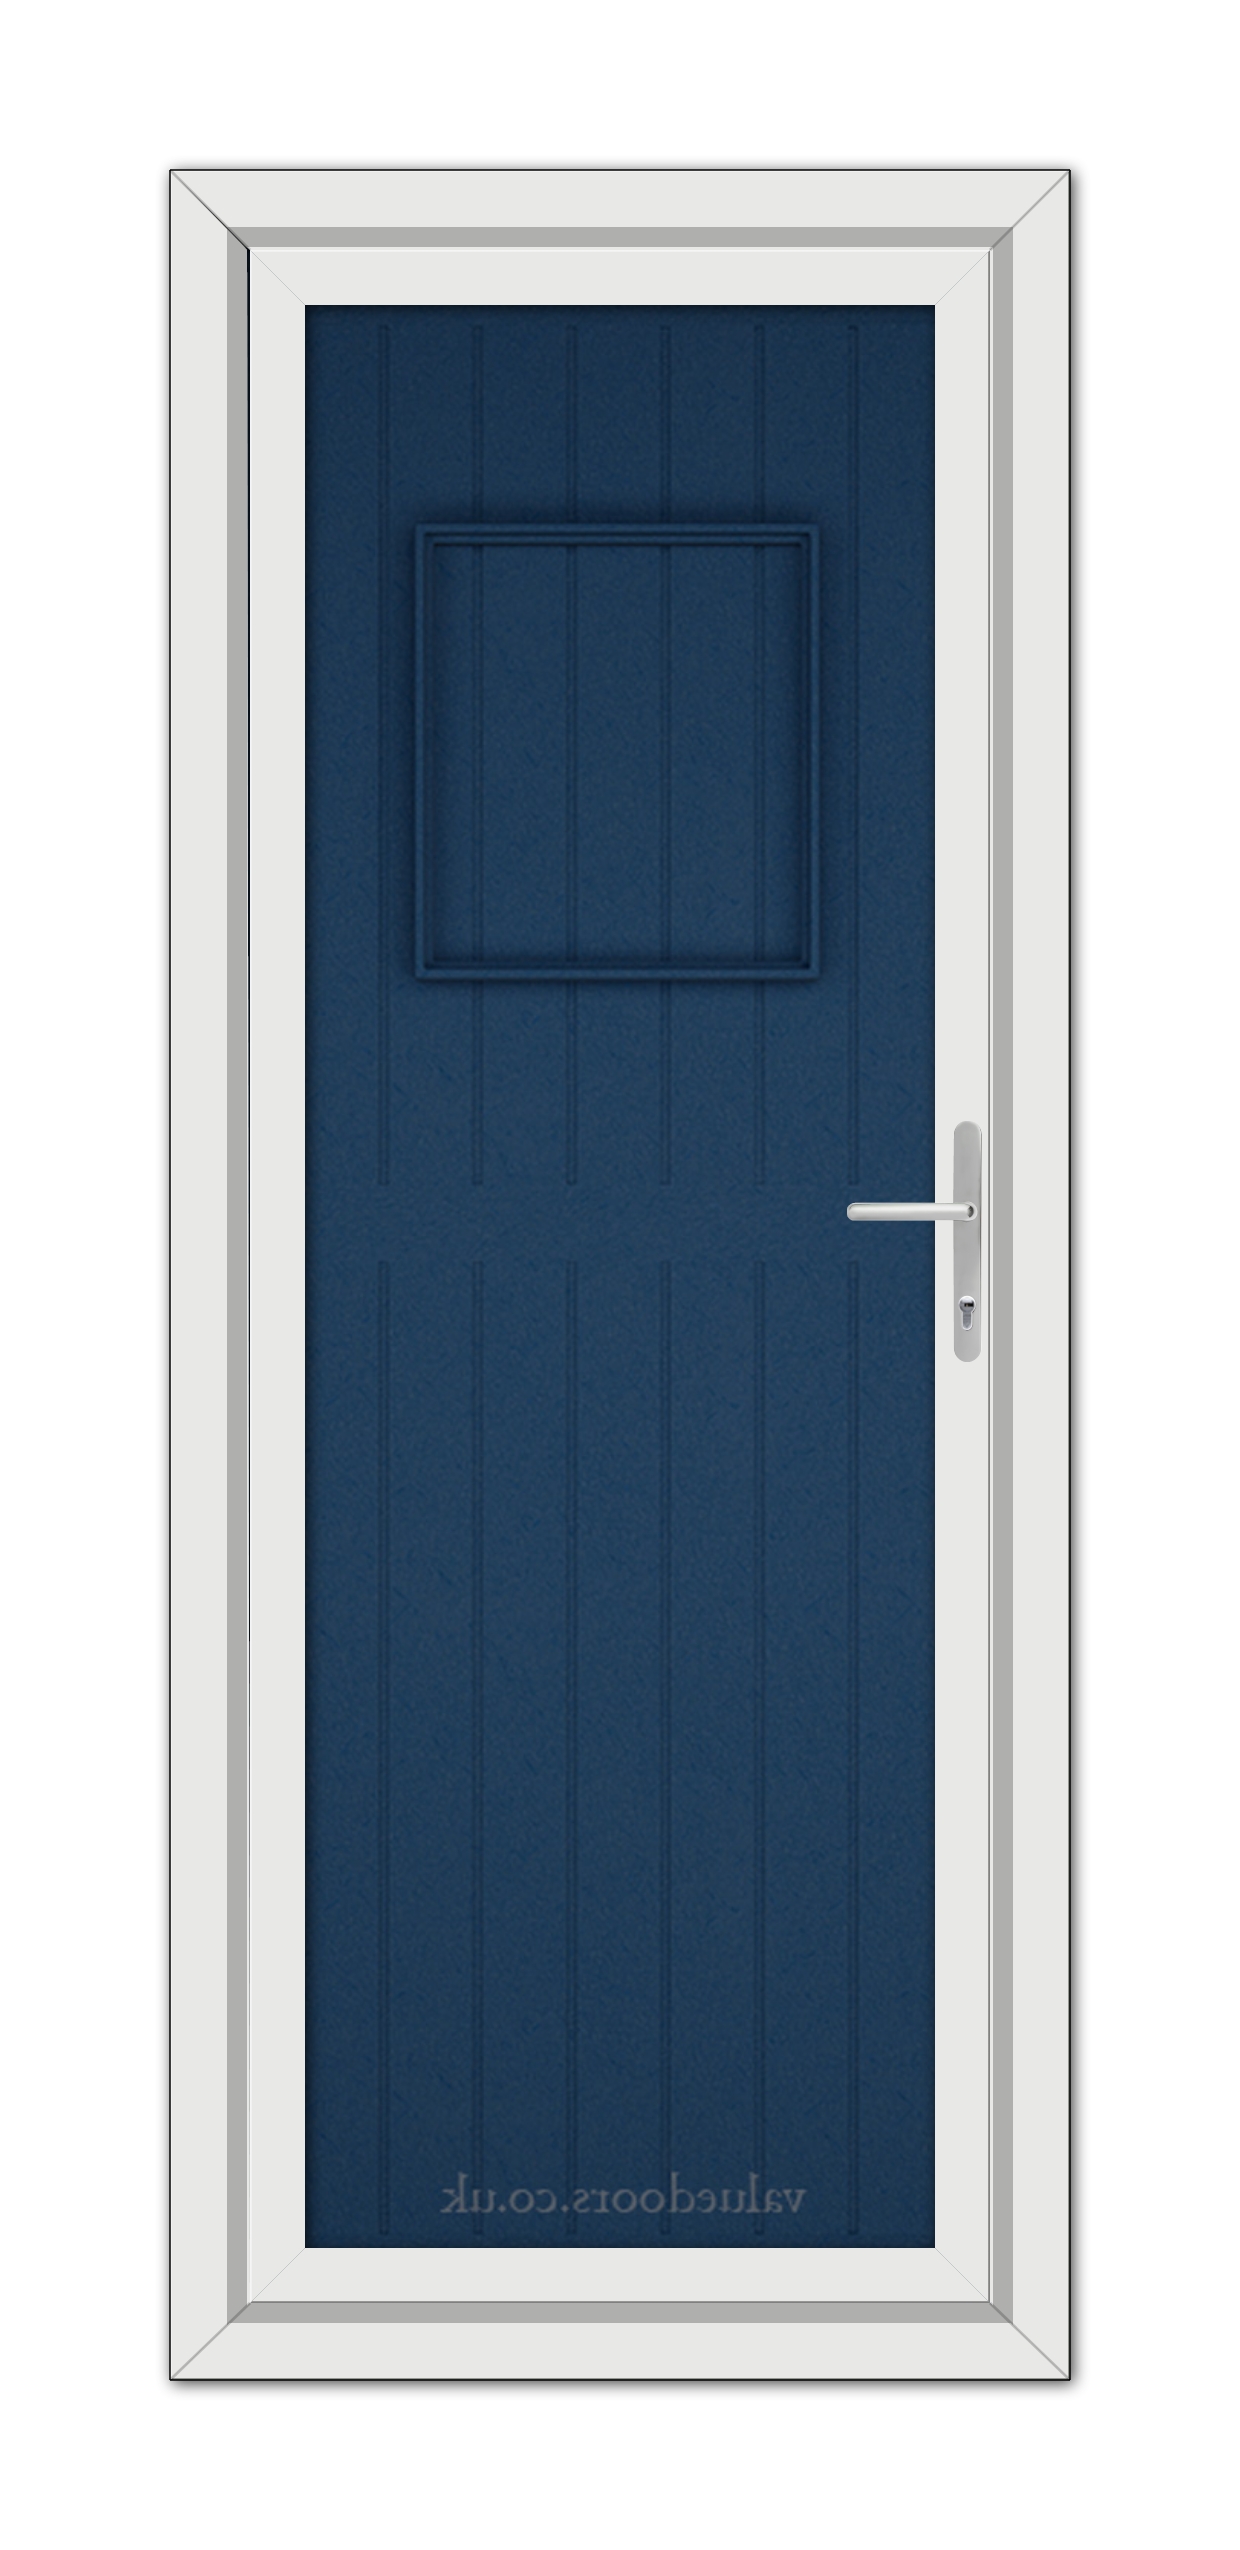 A modern Blue Chatsworth Solid uPVC Door with a rectangular window at the top, framed in white, featuring a silver handle on the right side.